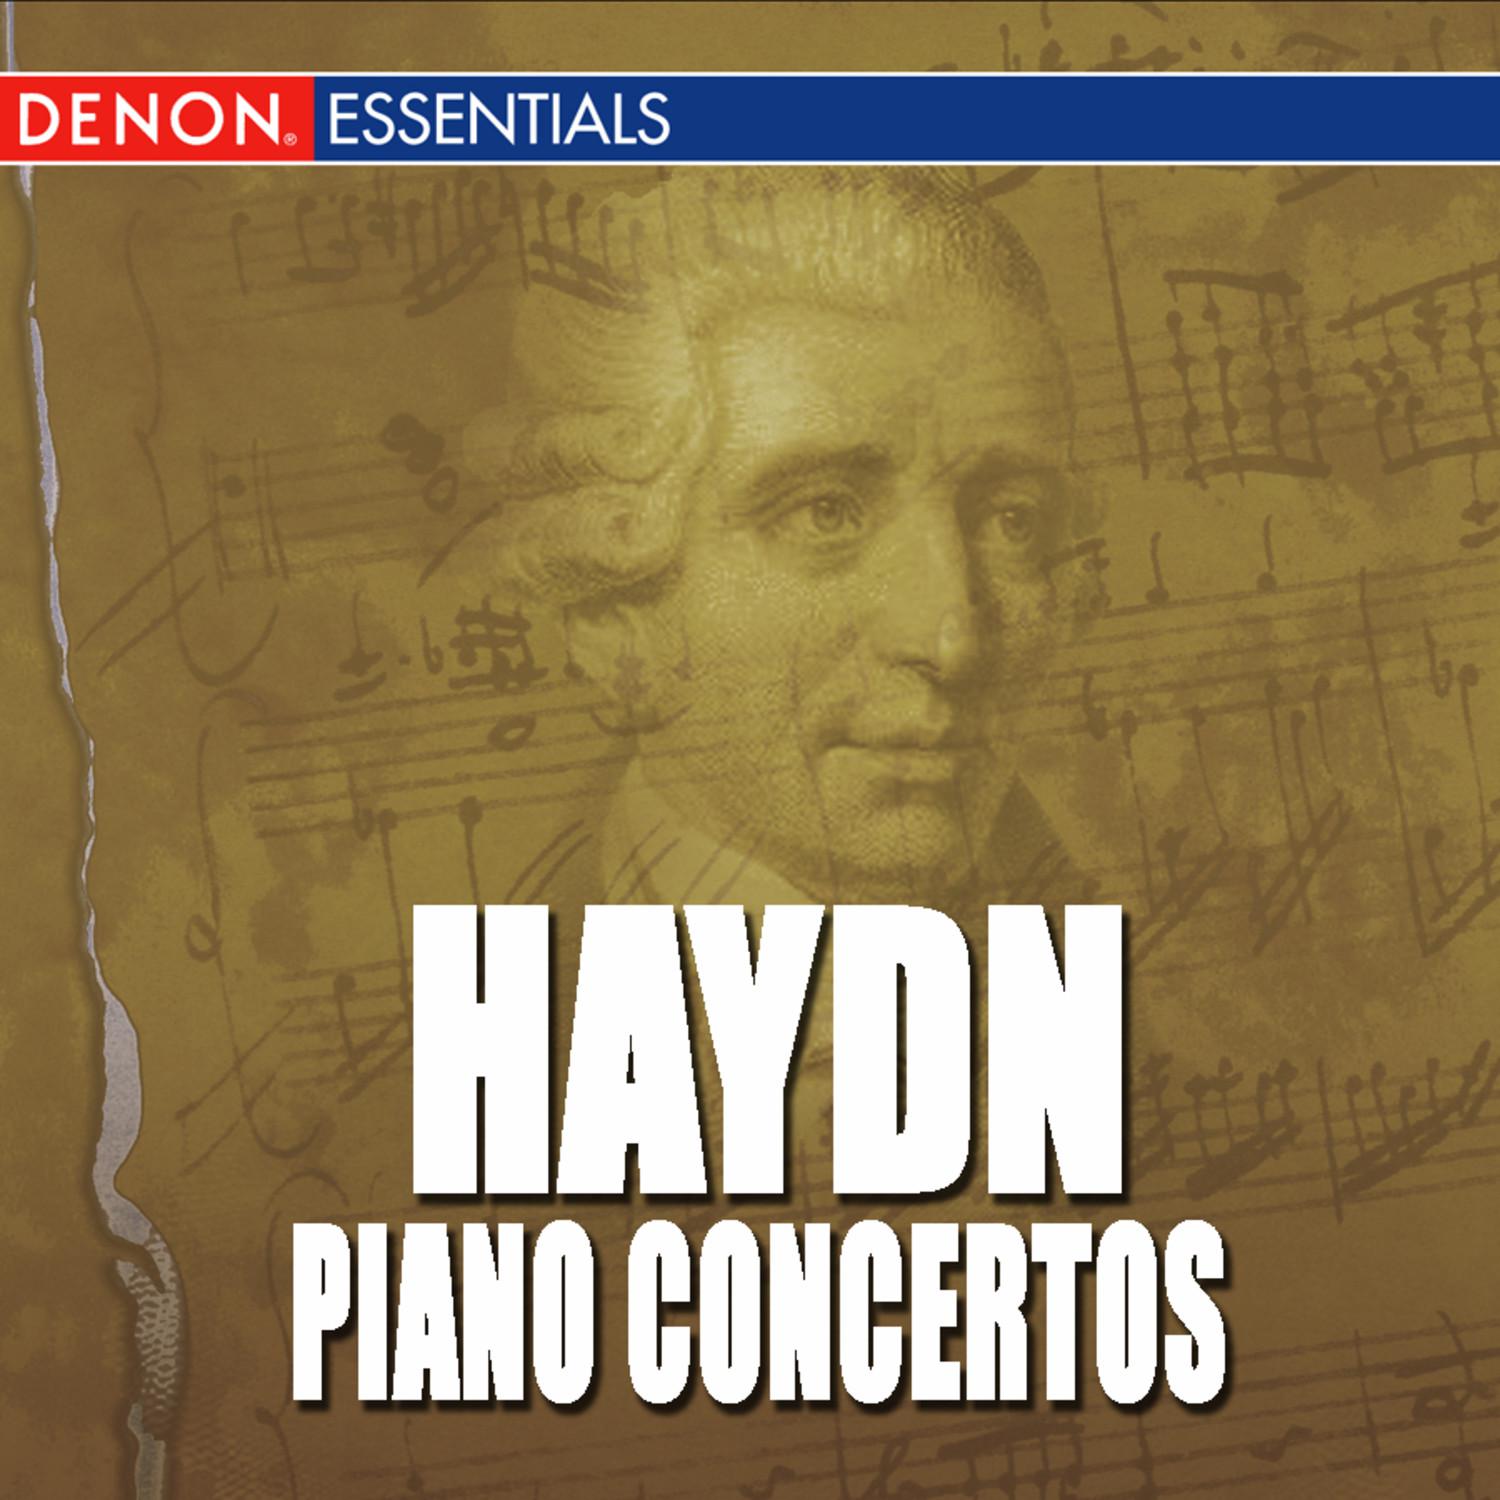 Concerto for Piano and Orchestra No. 2 in D Major, Op. 11: I. Vivace